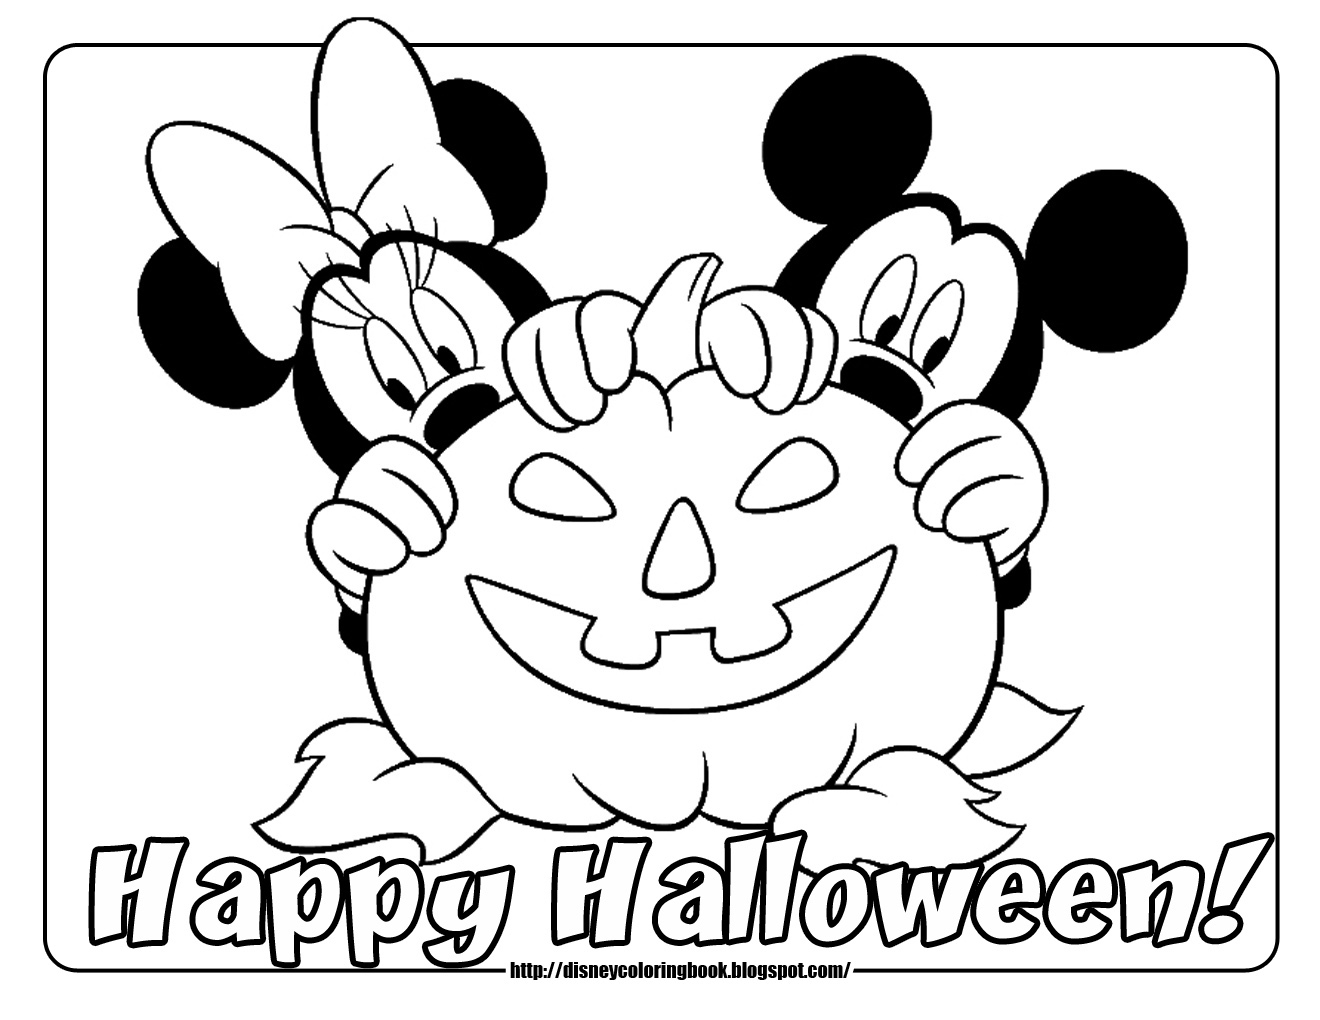 Disney coloring pages and sheets for kids mickey and friends halloween free disney halloween coloring pages